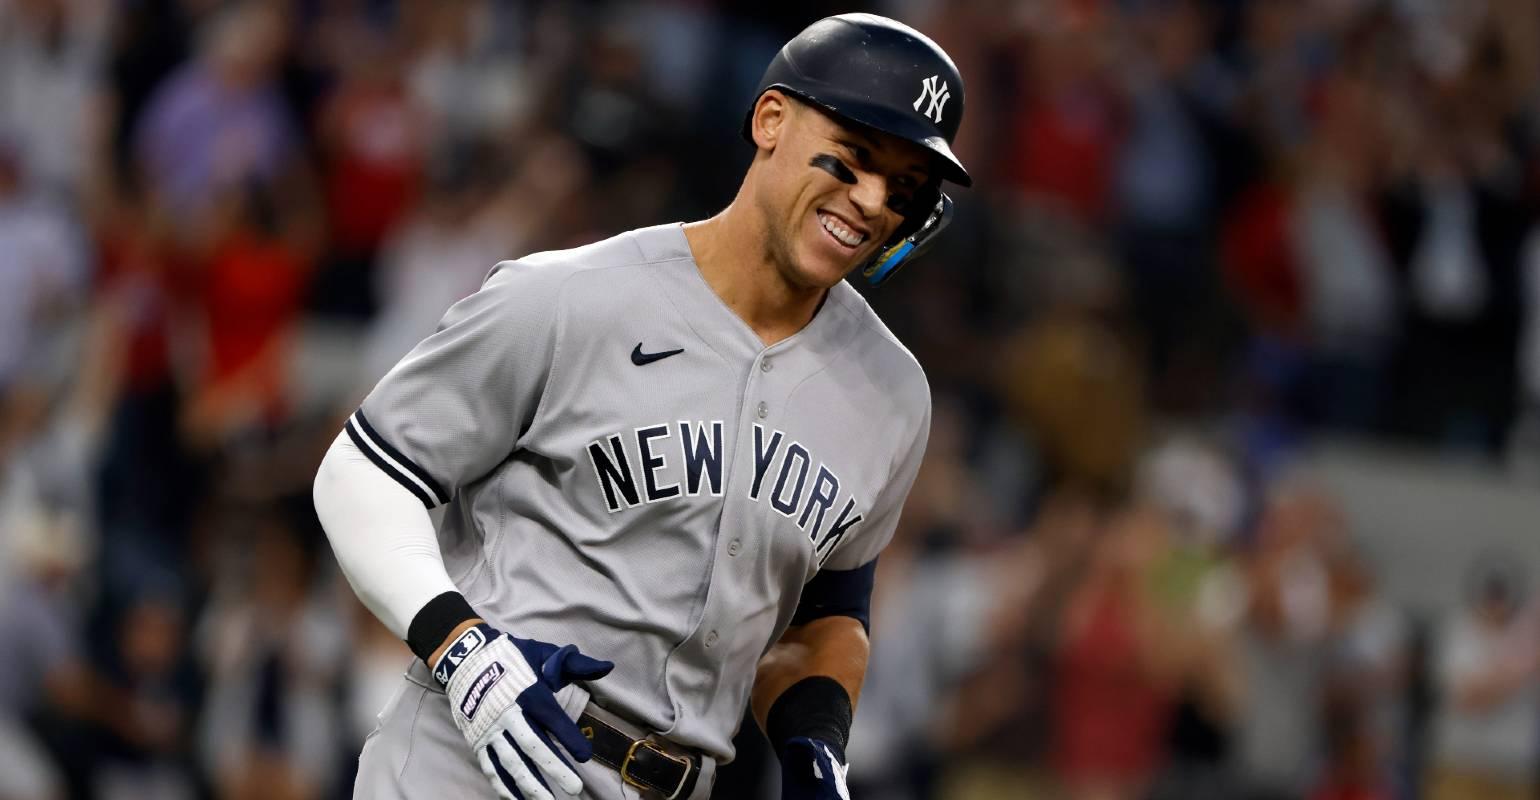 Numbers up: Aaron Judge not the only Yankee in the 90s on his